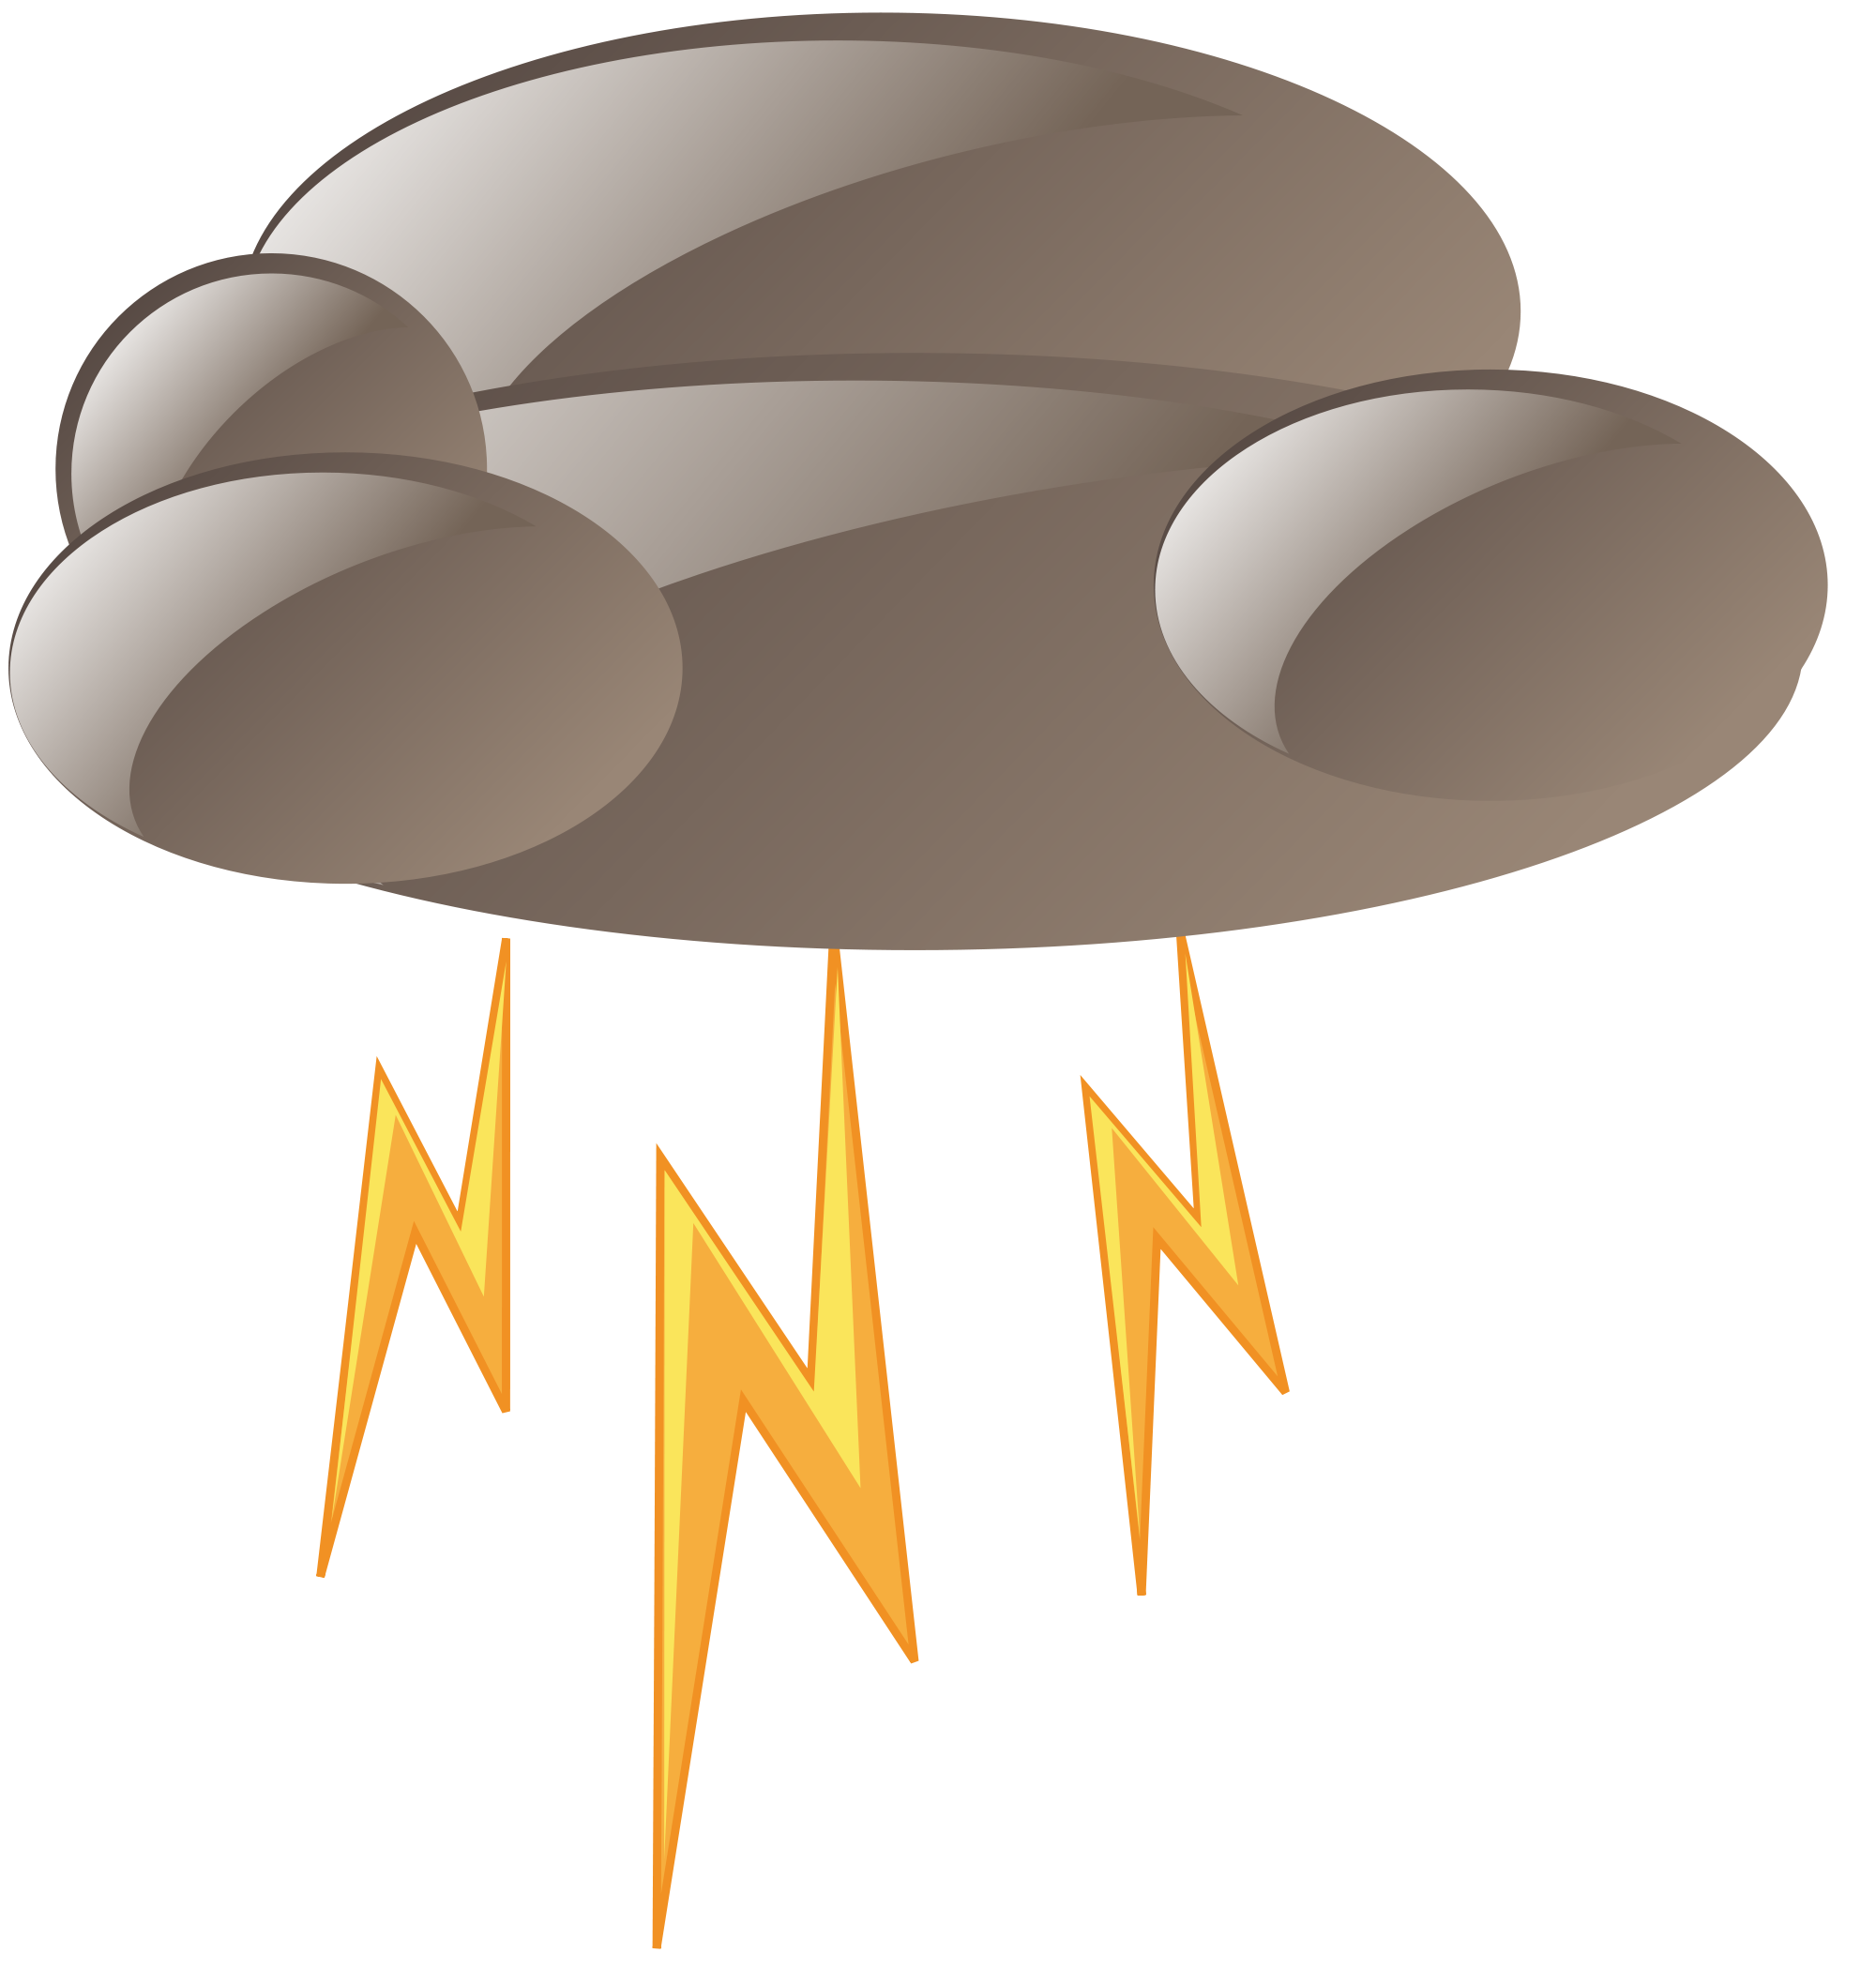 cloudy clipart thunderstorm cloud